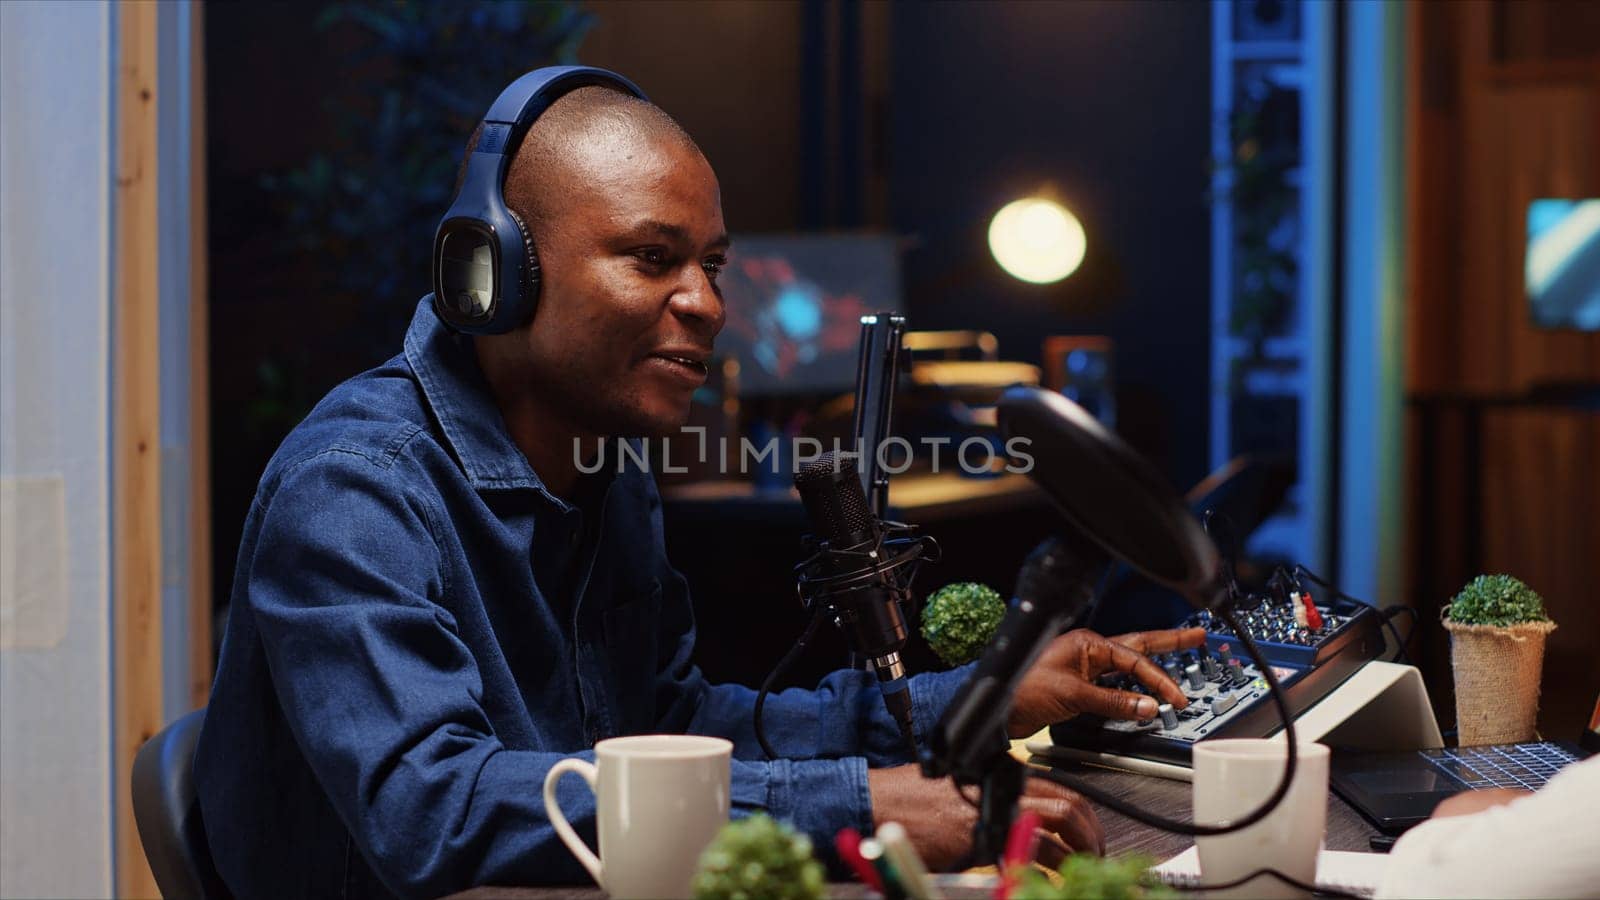 African american man recording podcast, adjusting microphone to ensure optimum sound quality for audience listening at home. Content creator using professional audio producing devices